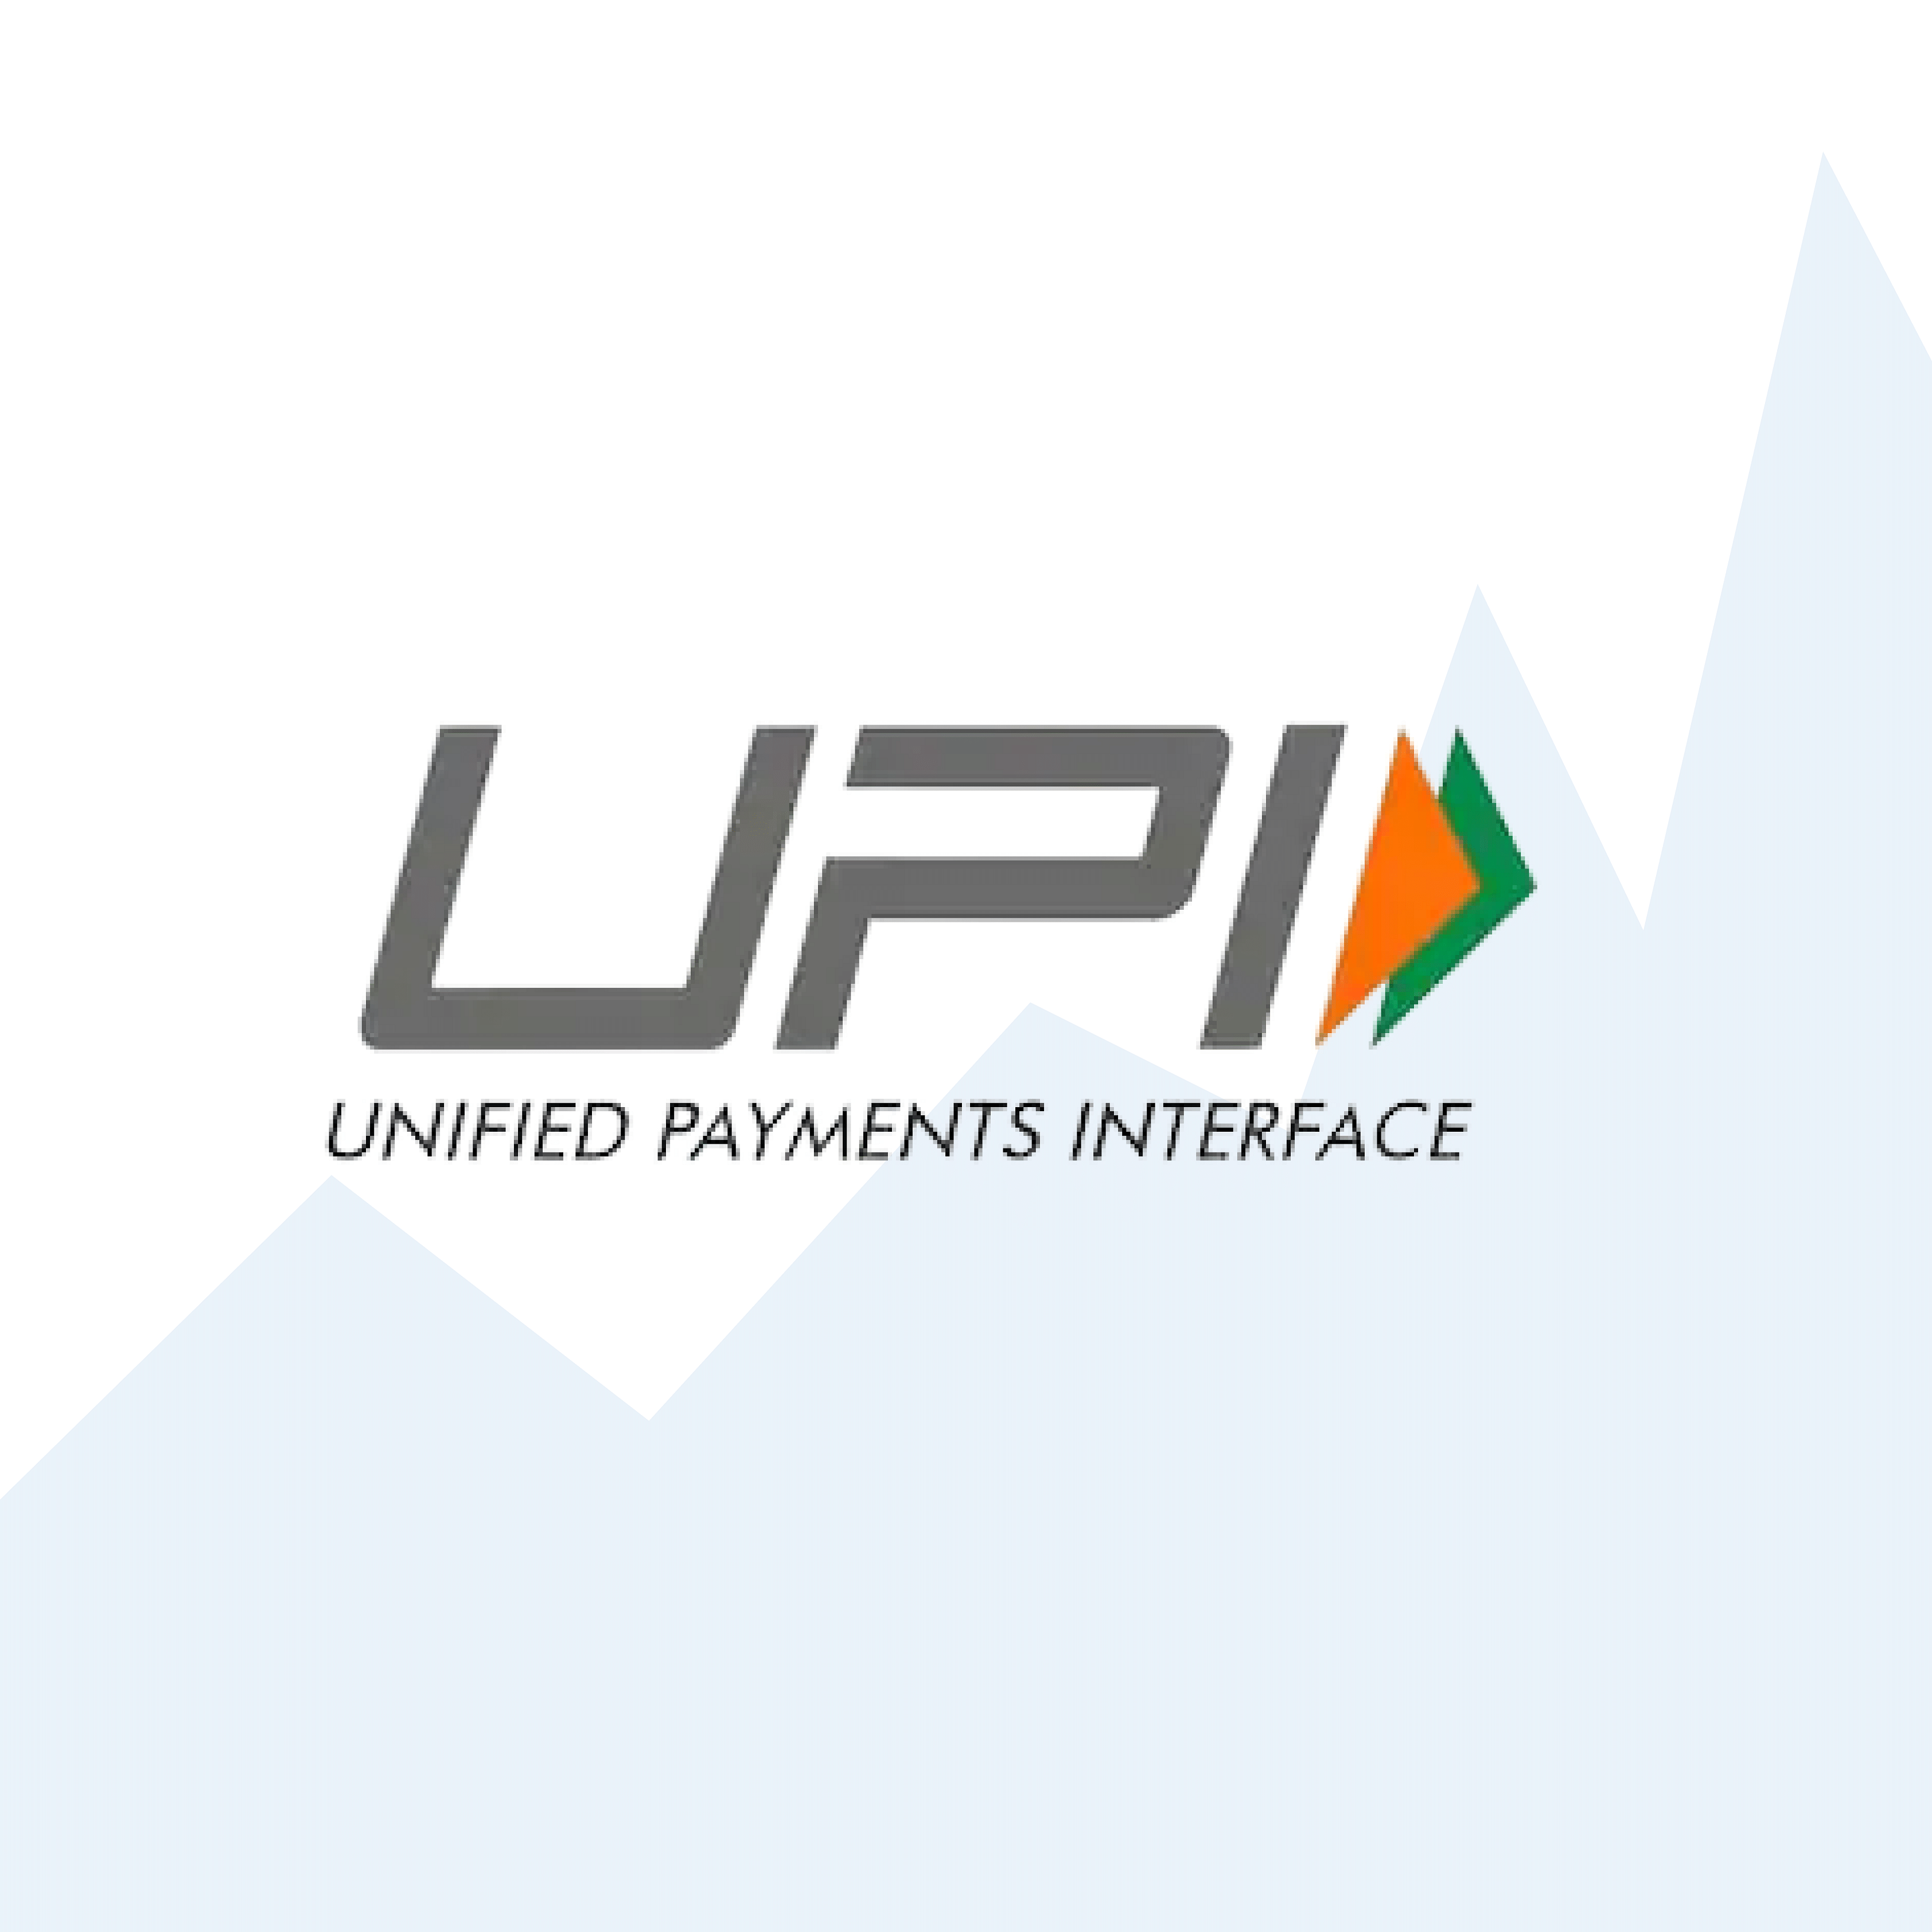 Will UPI transaction value be ₹13 lakh crore or more in March?